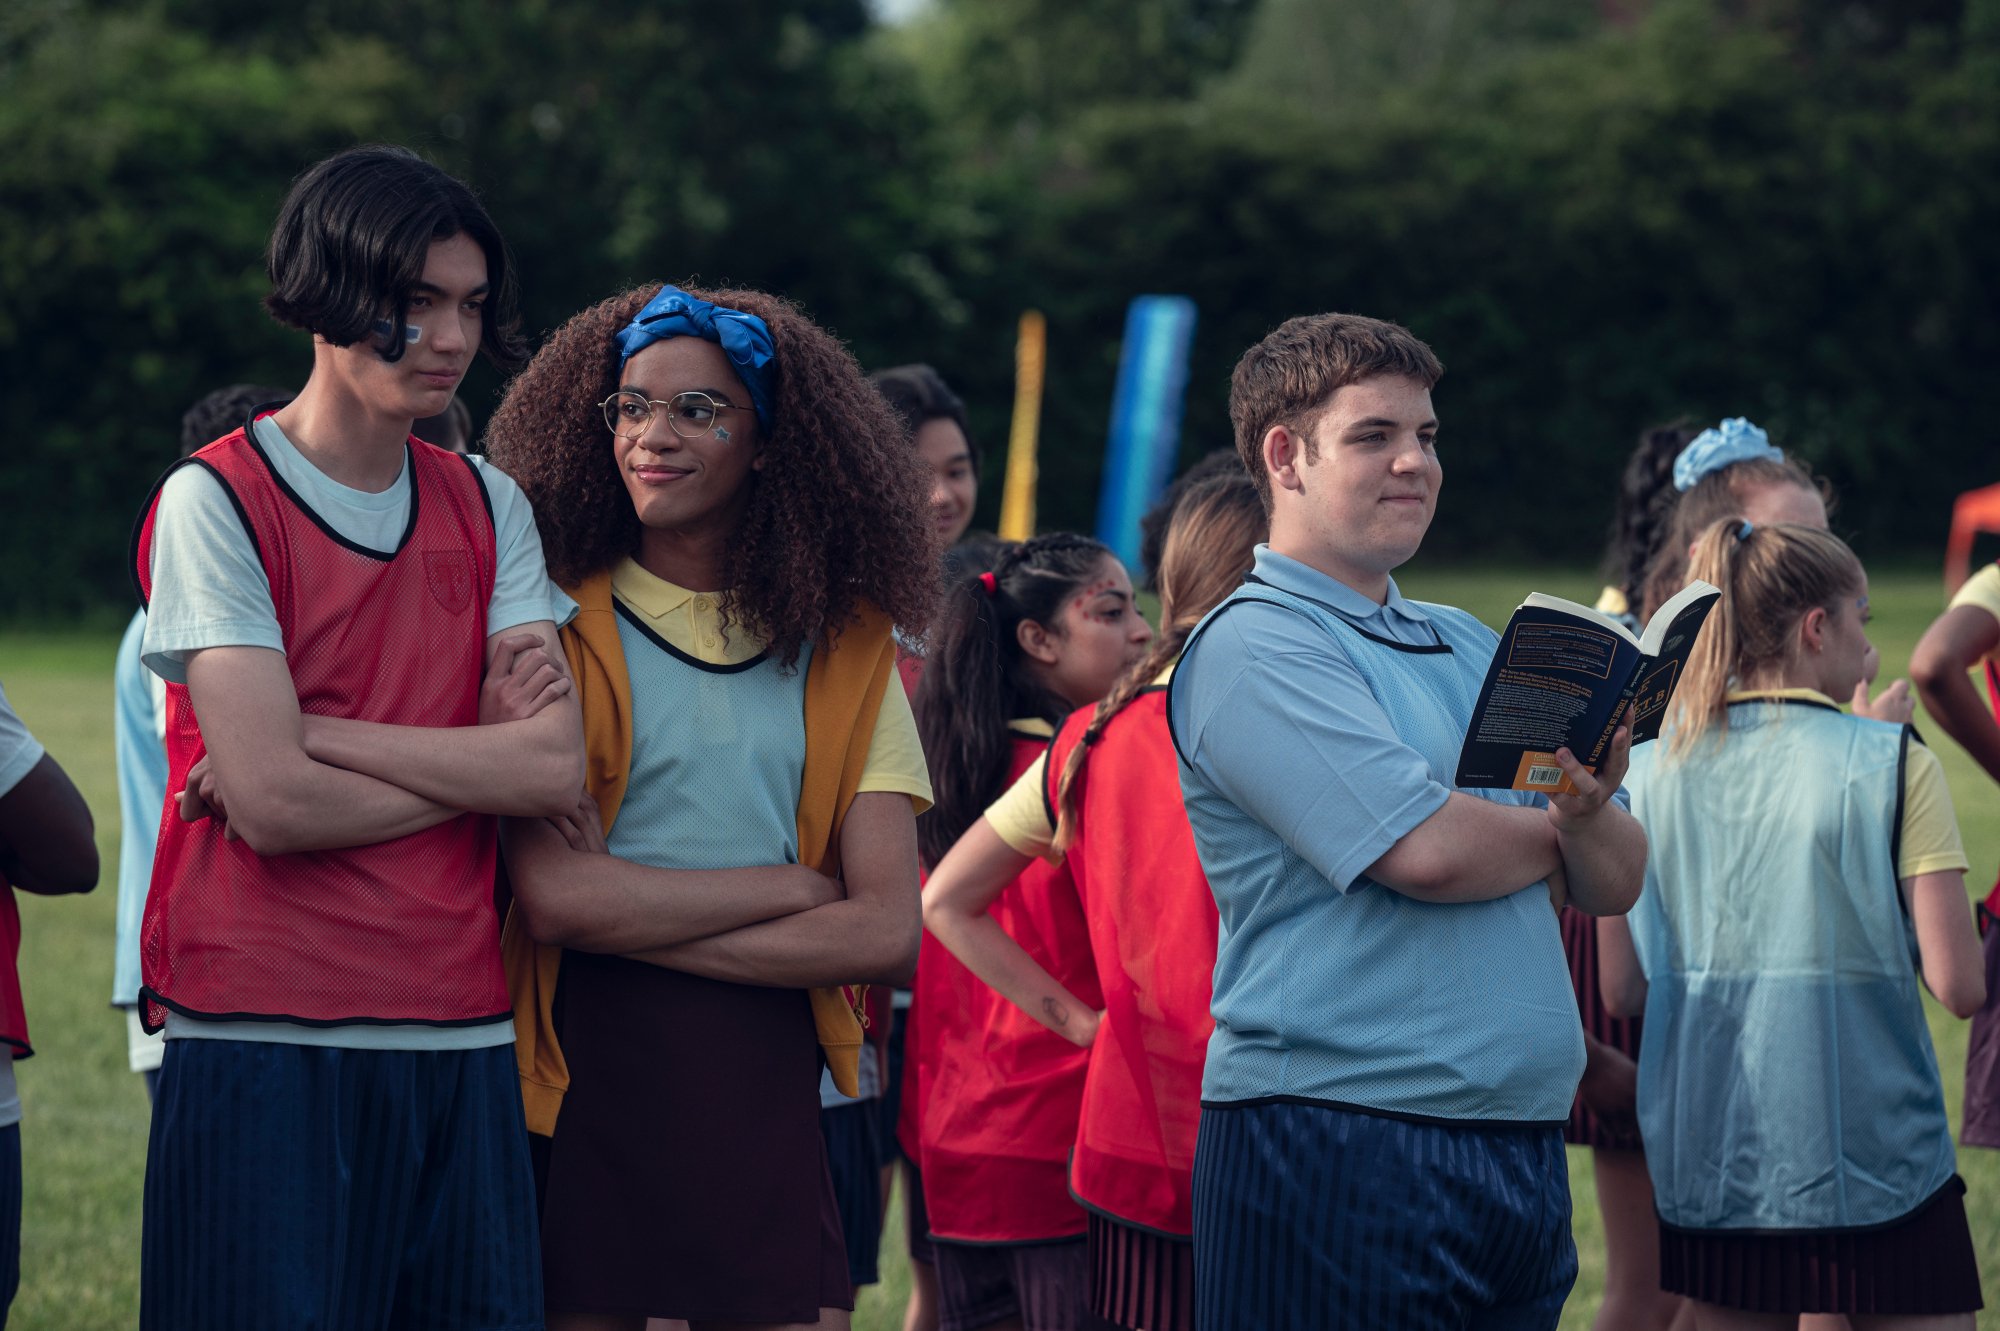 William Gao, Yasmin Finney, and Tobie Donovan as Tao, Elle, and Isaac in Netflix's TV show adaptation of the 'Heartstopper' books. They're standing next to one another outside, and there's a crowd of people behind them.